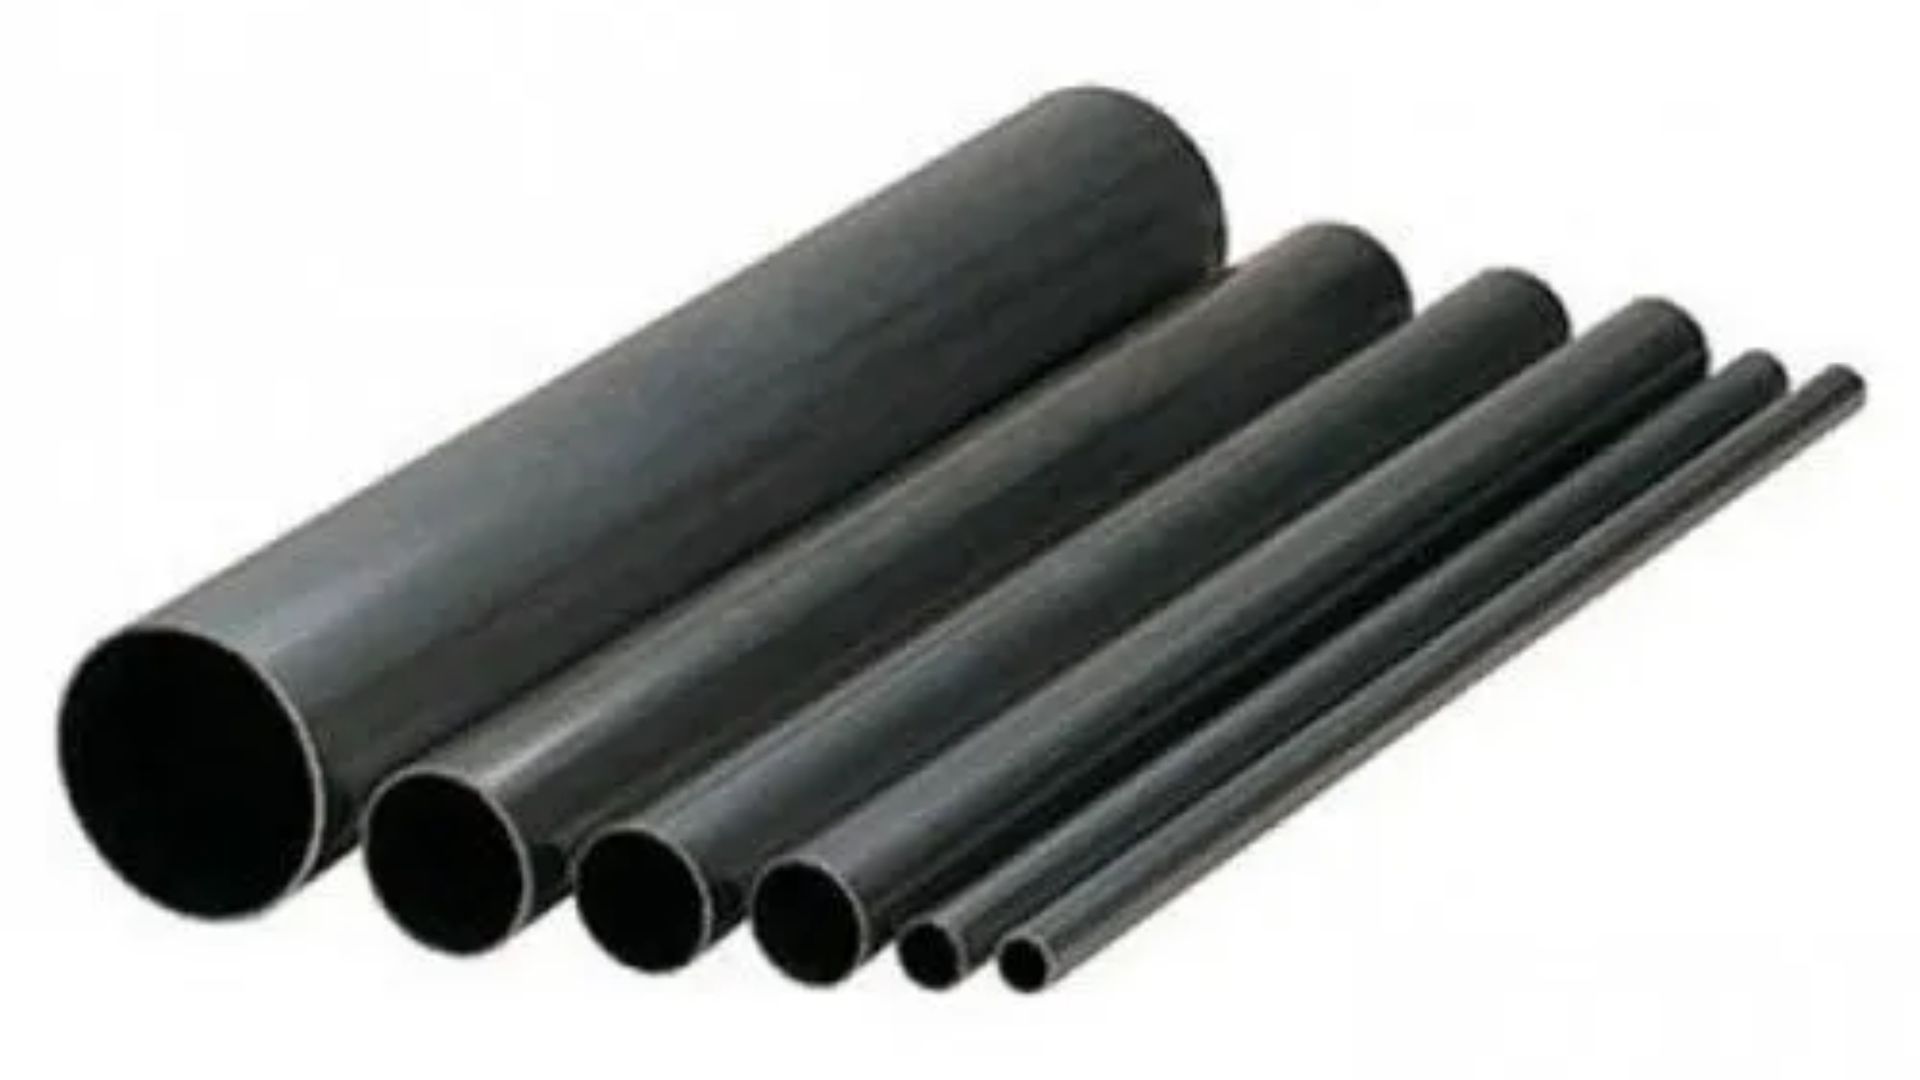 Top 5 Factors to Consider When Selecting a Decoduct Pipe Dealer 